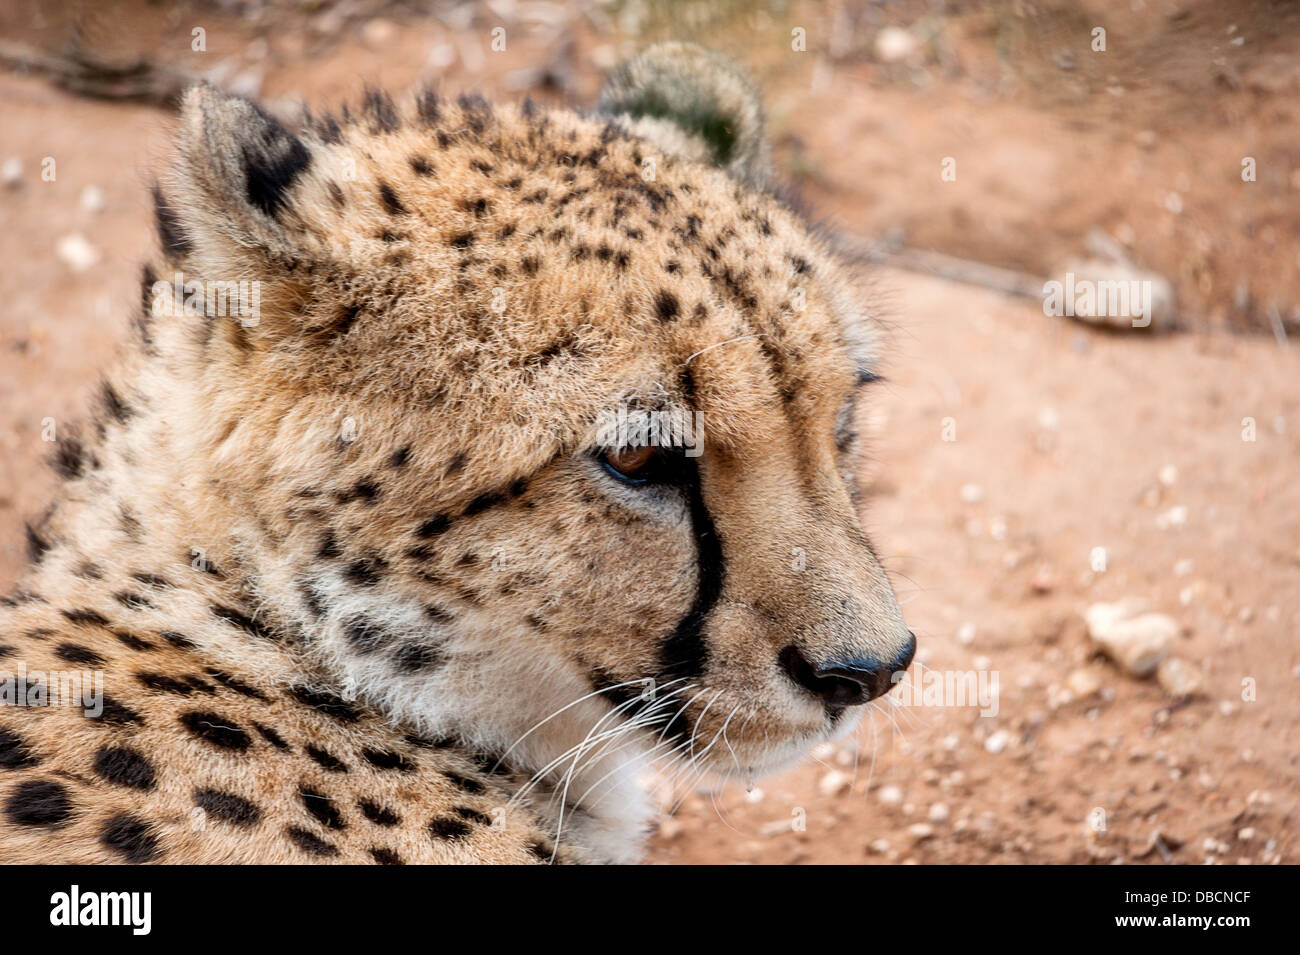 A closeup photograph of a cheetah gazing into the distance looking for prey Stock Photo